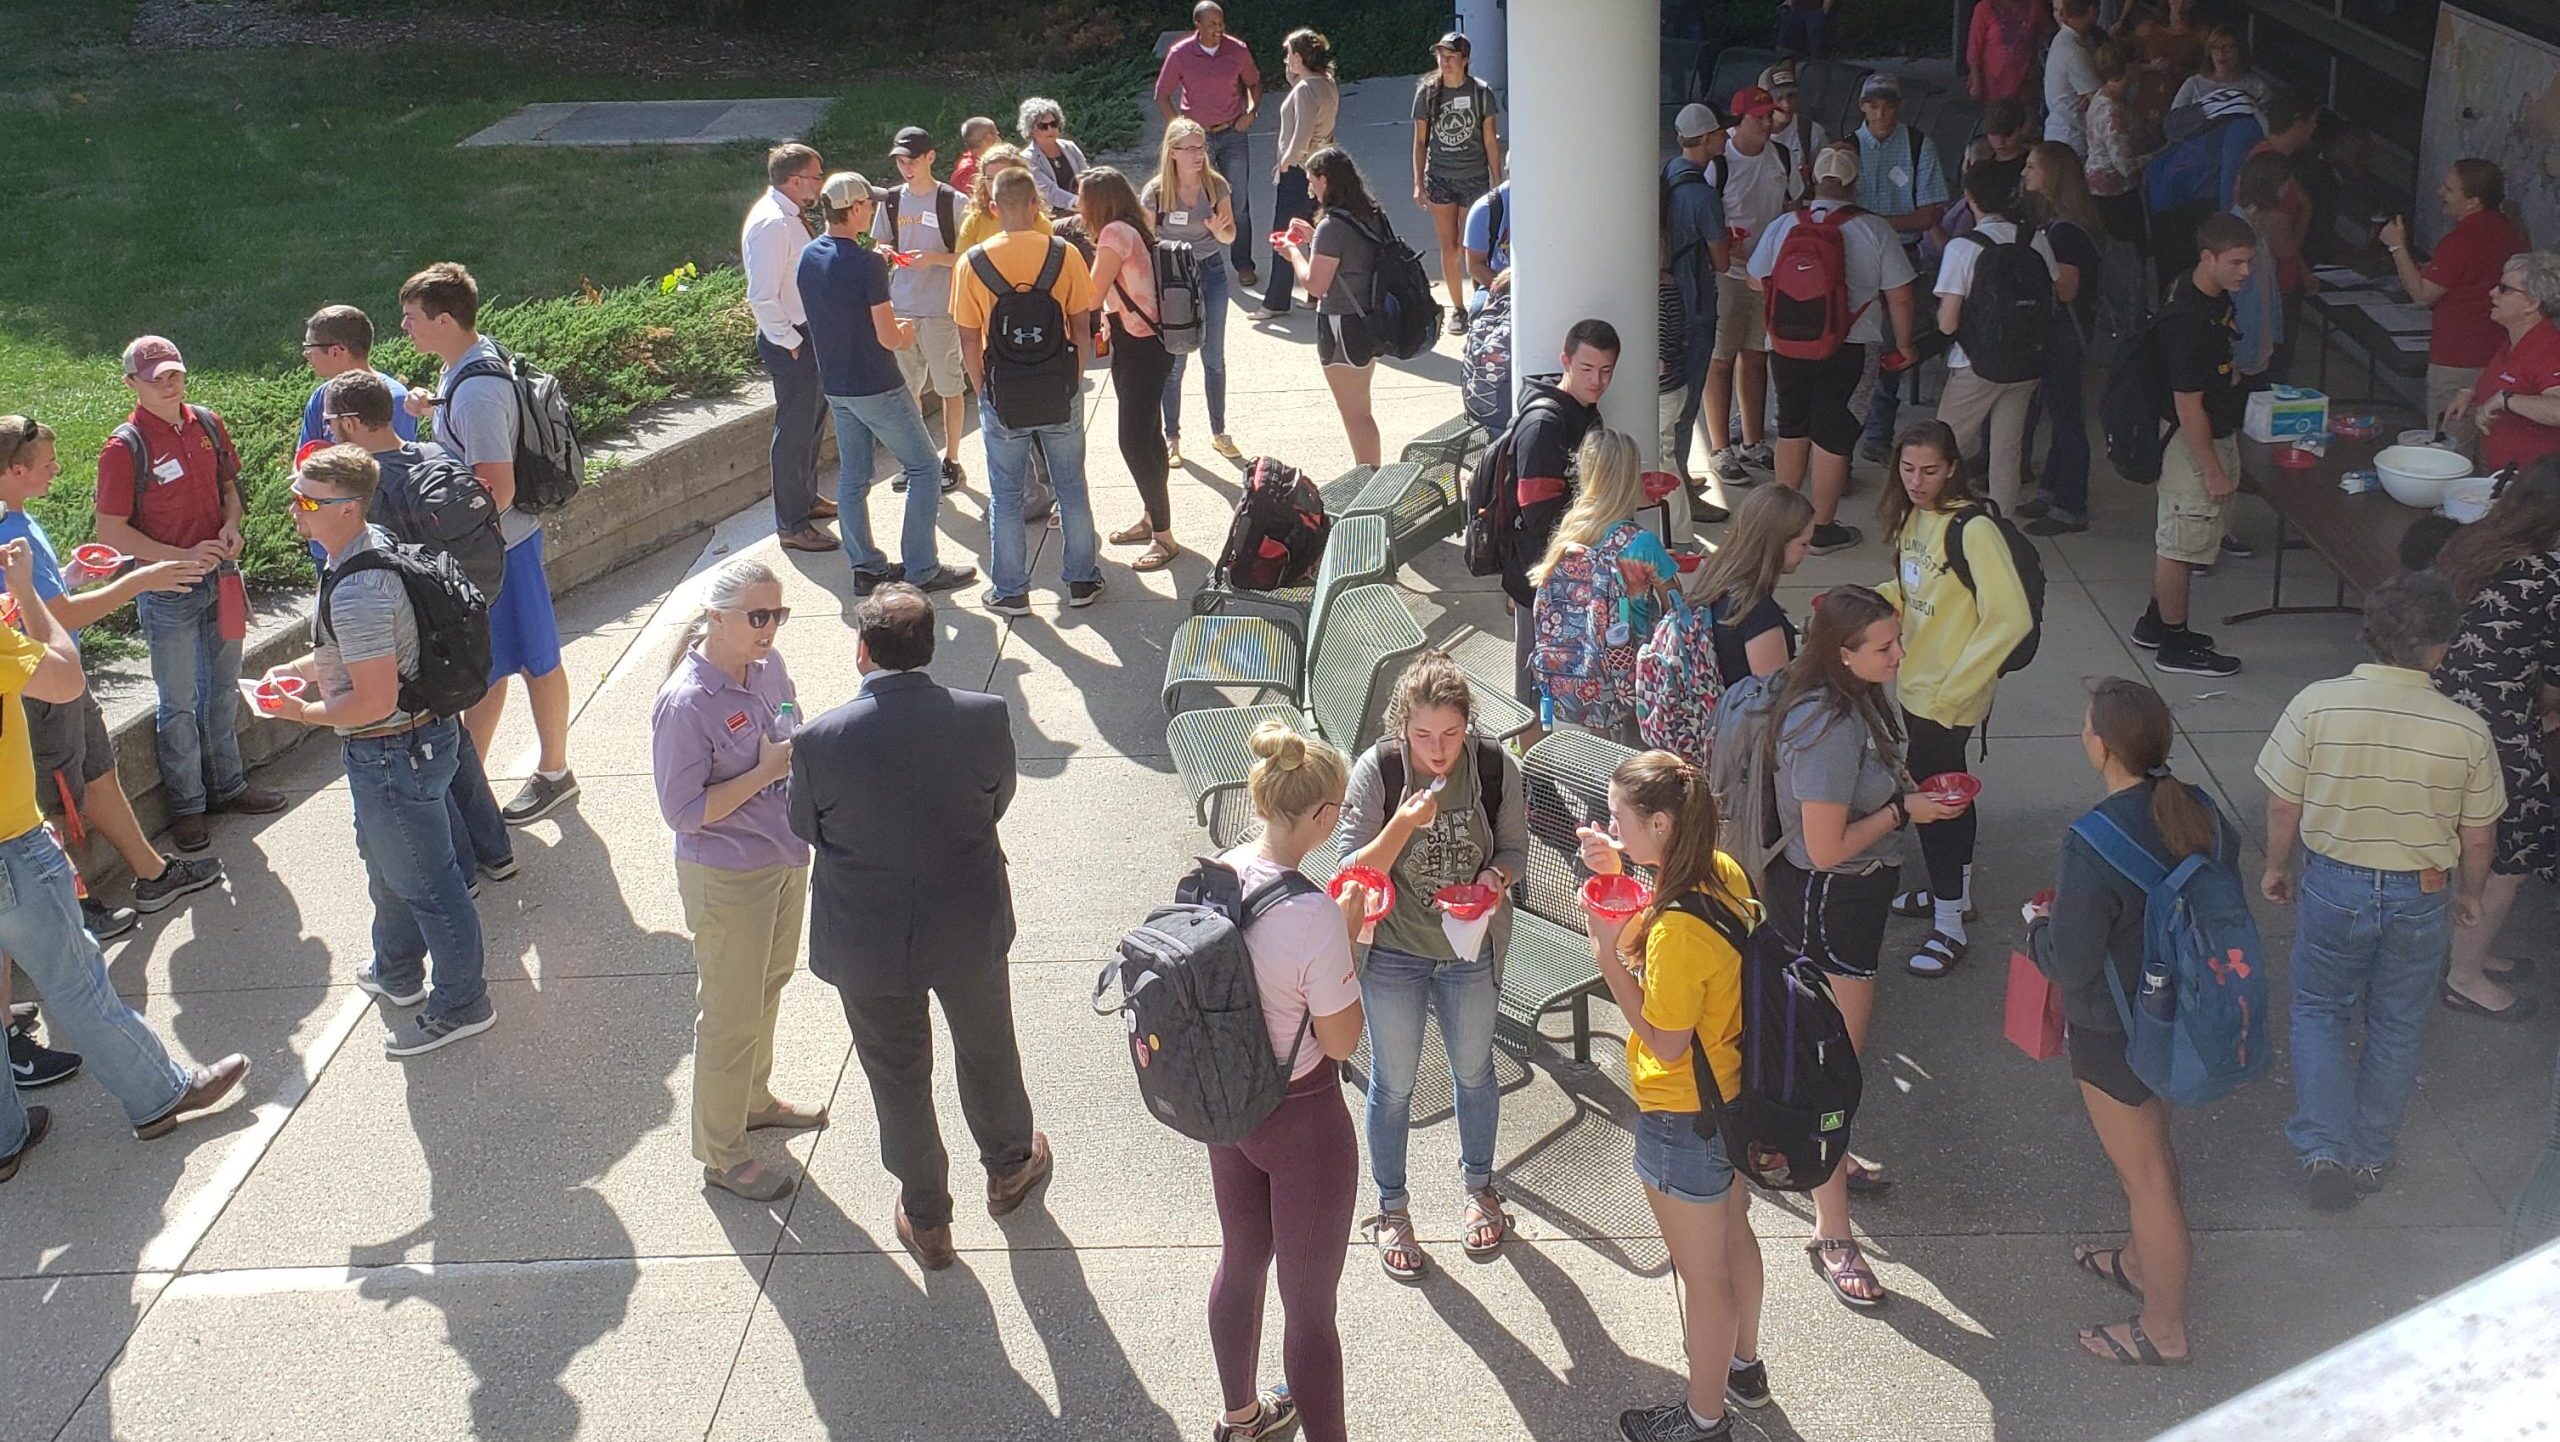 People gathered on the agronomy building courtyard